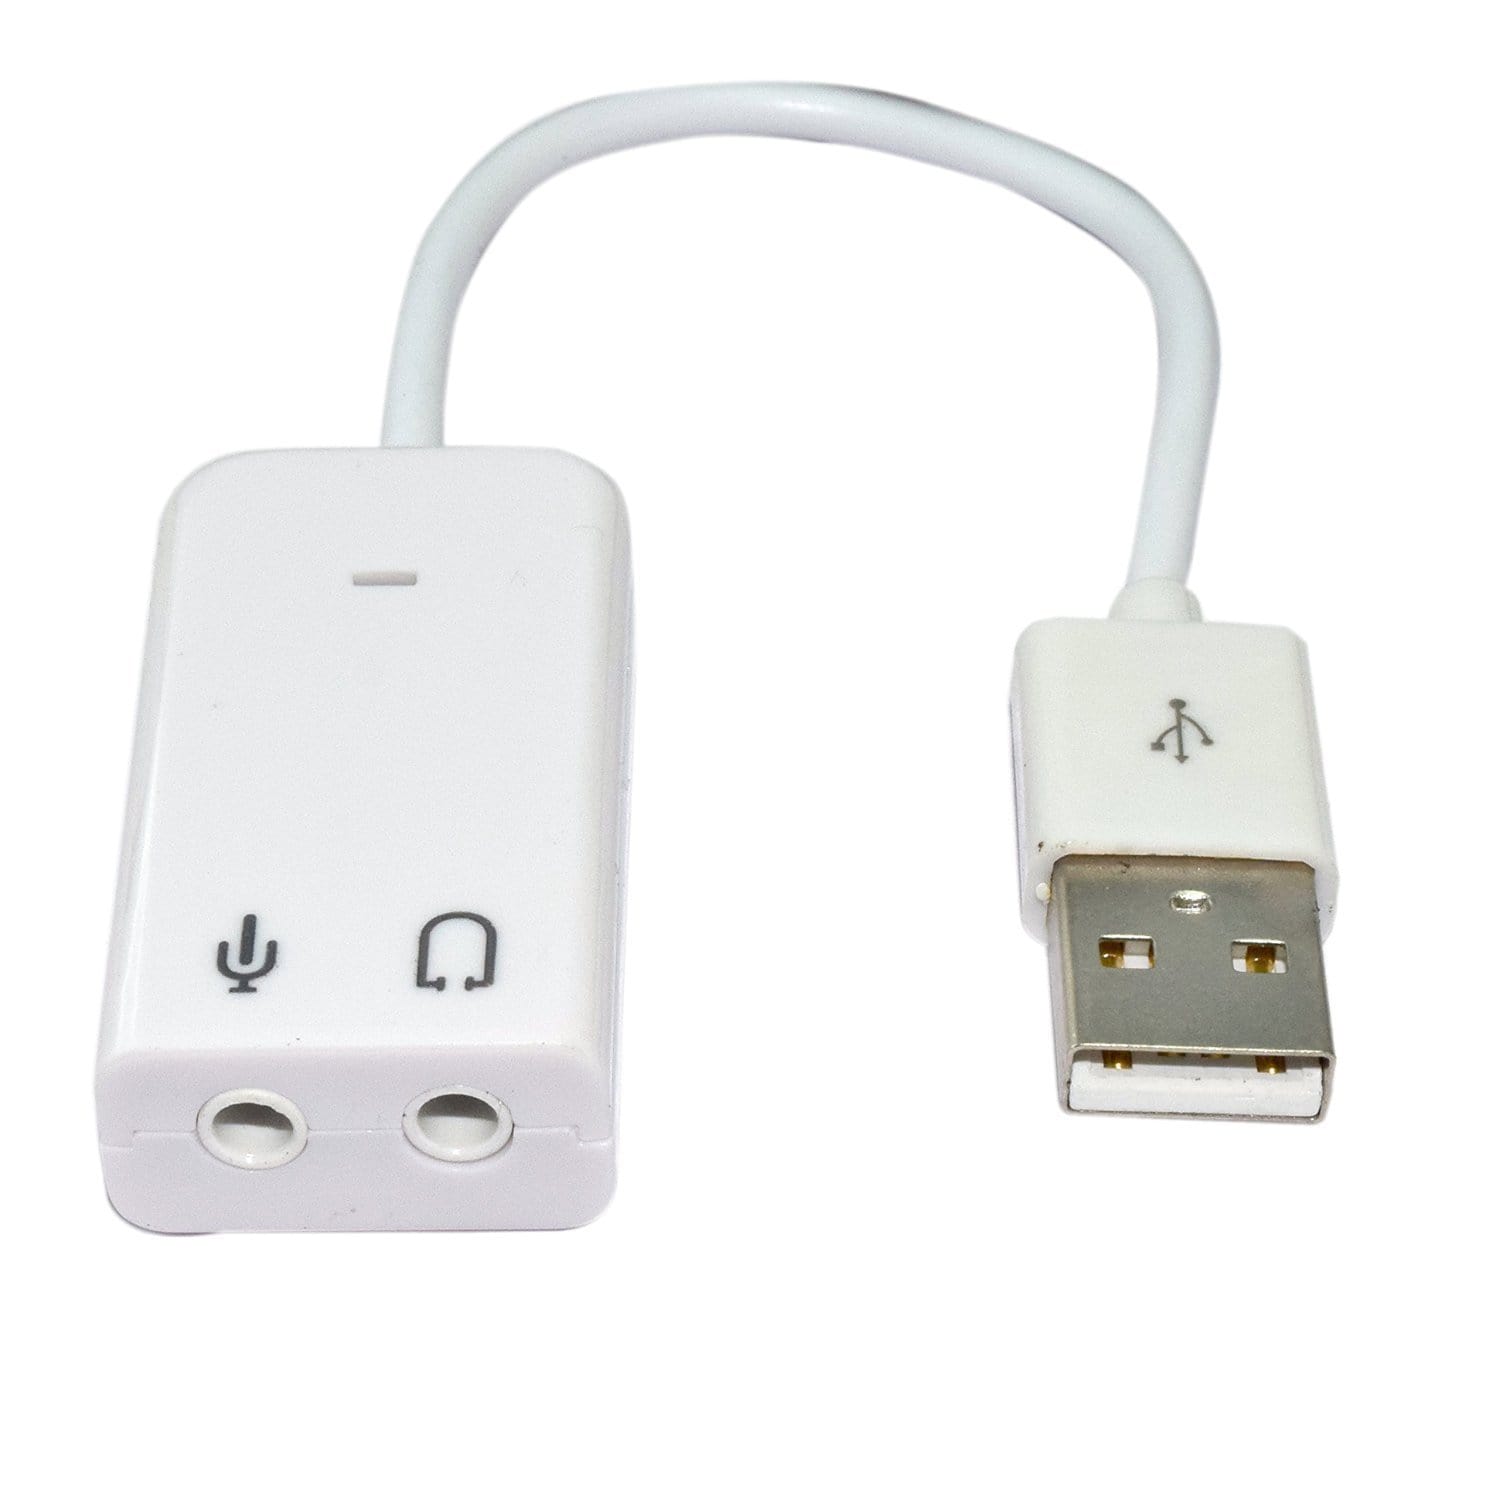 USB to Audio & Mic Cable - 7.1 Channel Apple Sound Card Audio Adapter With Mic - White-Mic cable-dealsplant